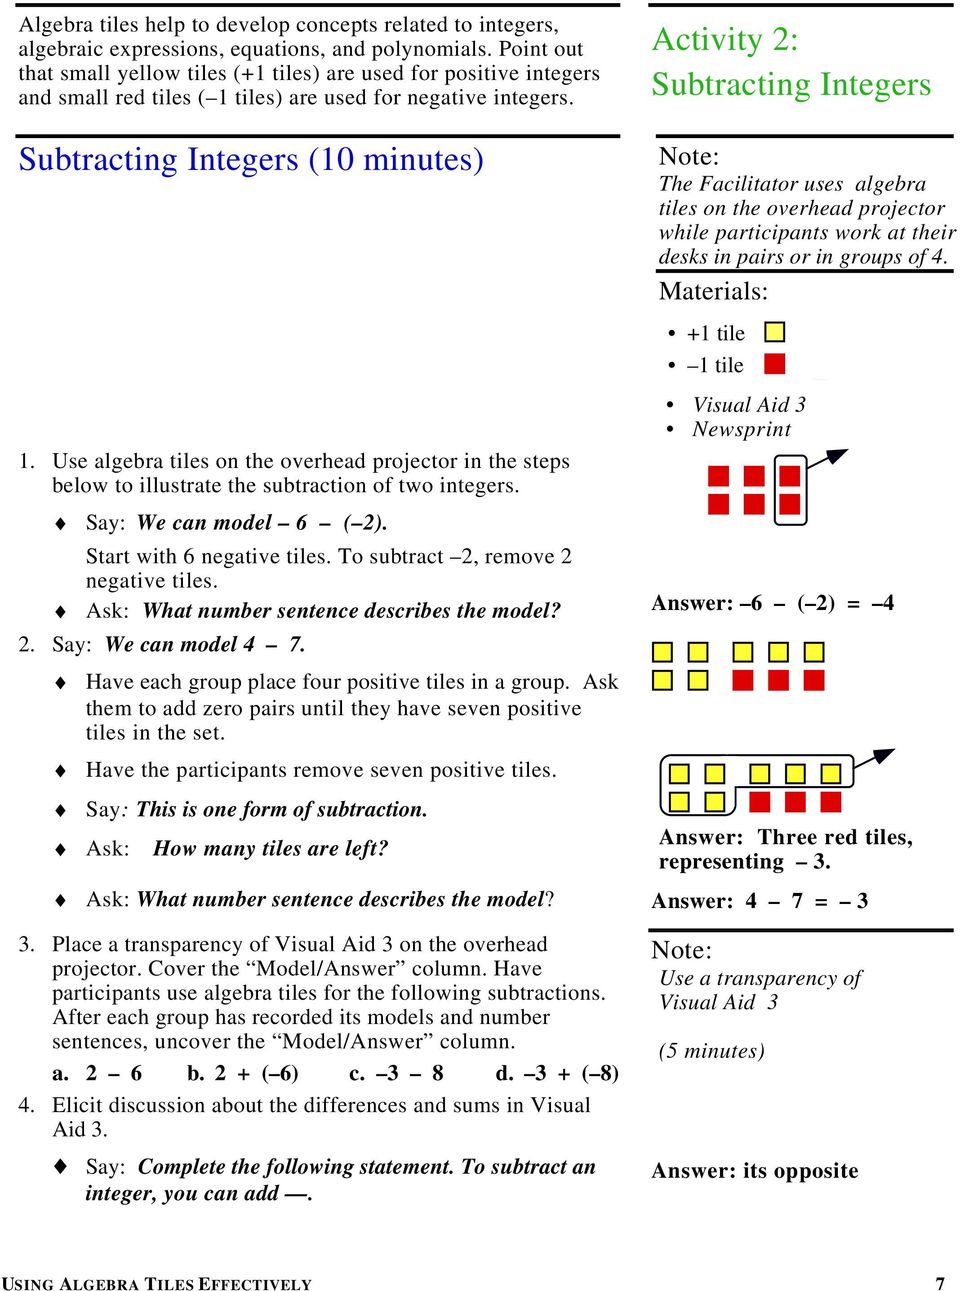 Subtracting Integers (10 minutes) Activity 2: Subtracting Integers The Facilitator uses algebra tiles on the overhead projector while participants work at their desks in pairs or in groups of 4.